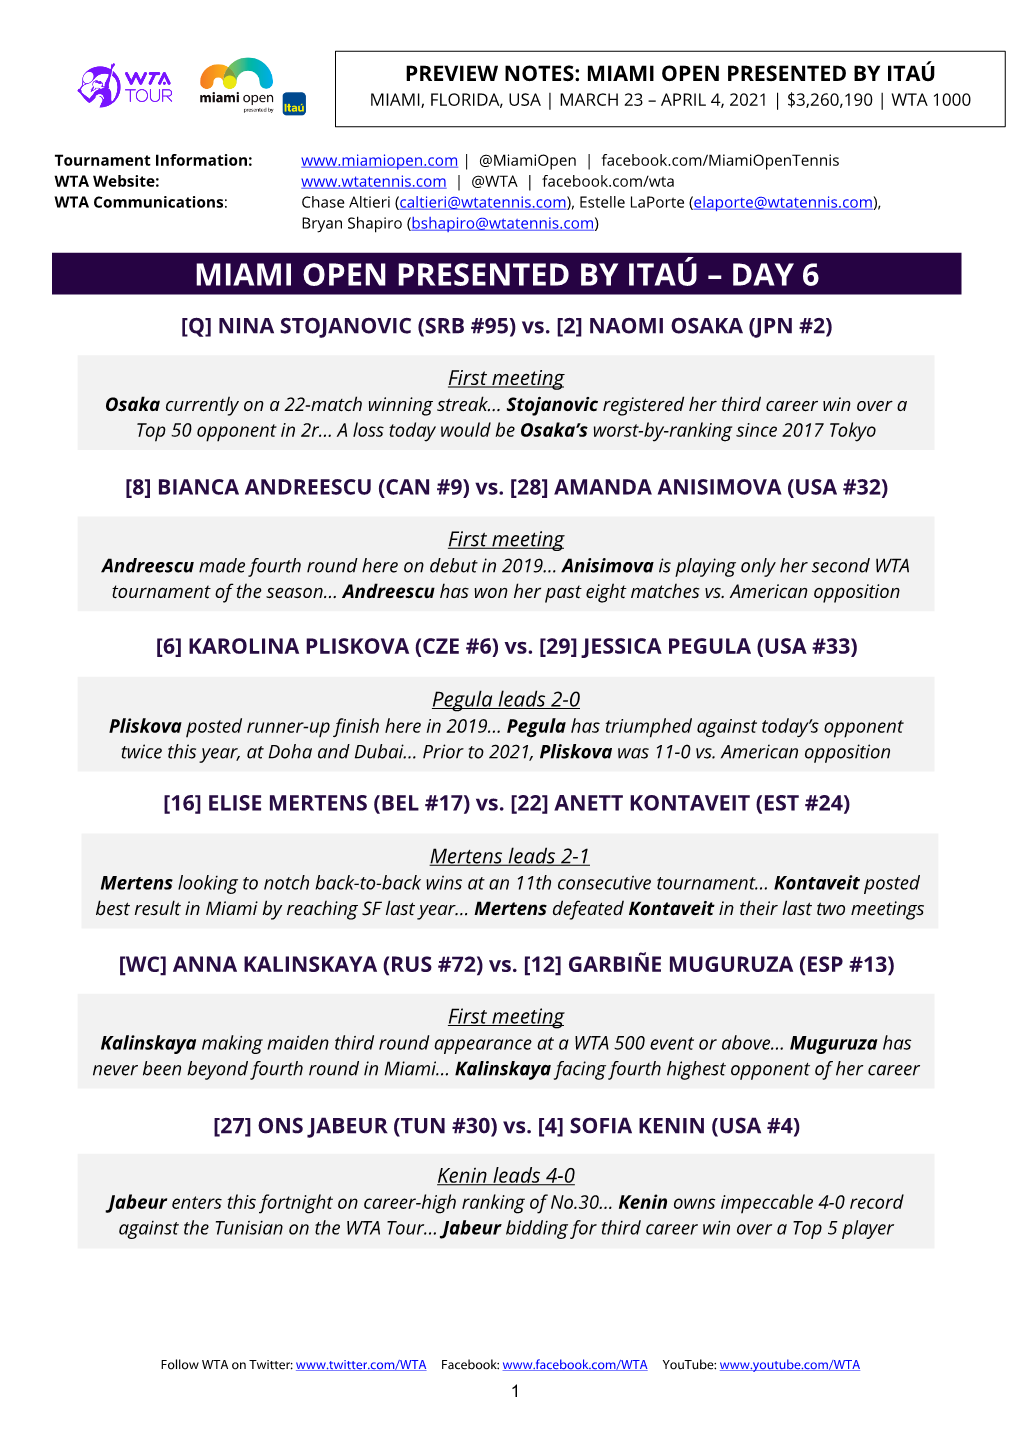 Miami Open Presented by Itaú – Day 6